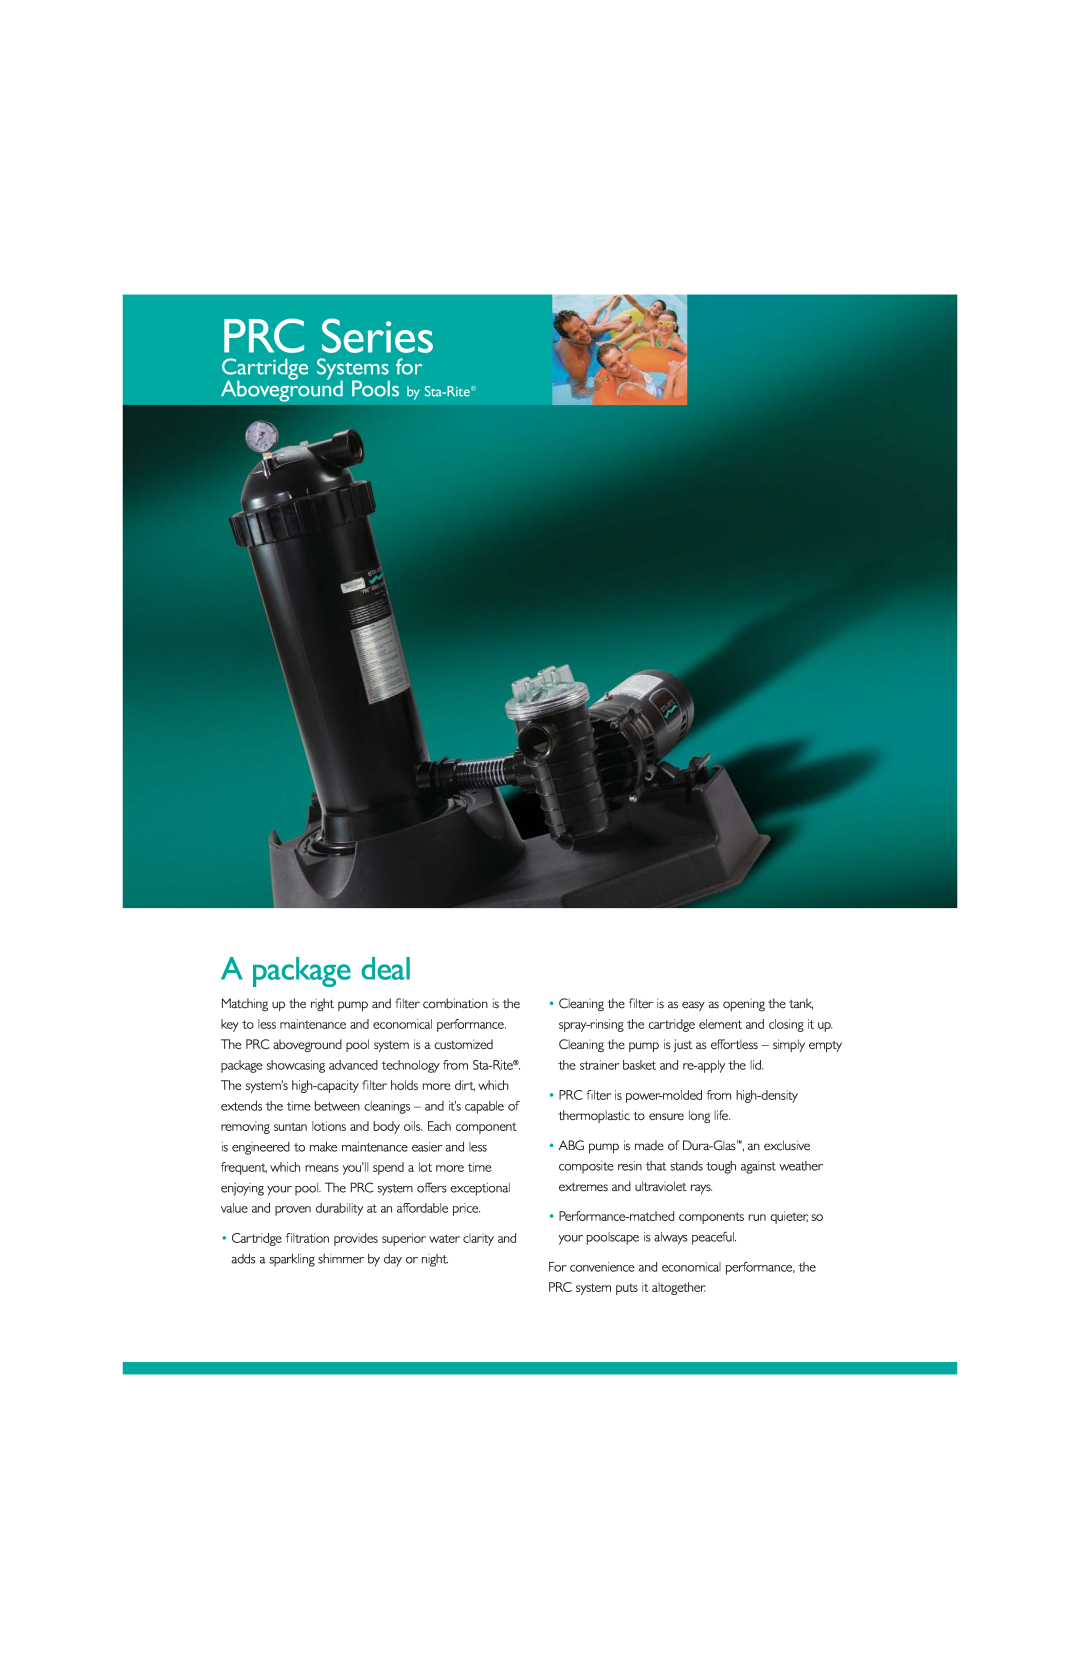 Pentair PRC Series manual A package deal, Cartridge Systems for Aboveground Pools by Sta-Rite 